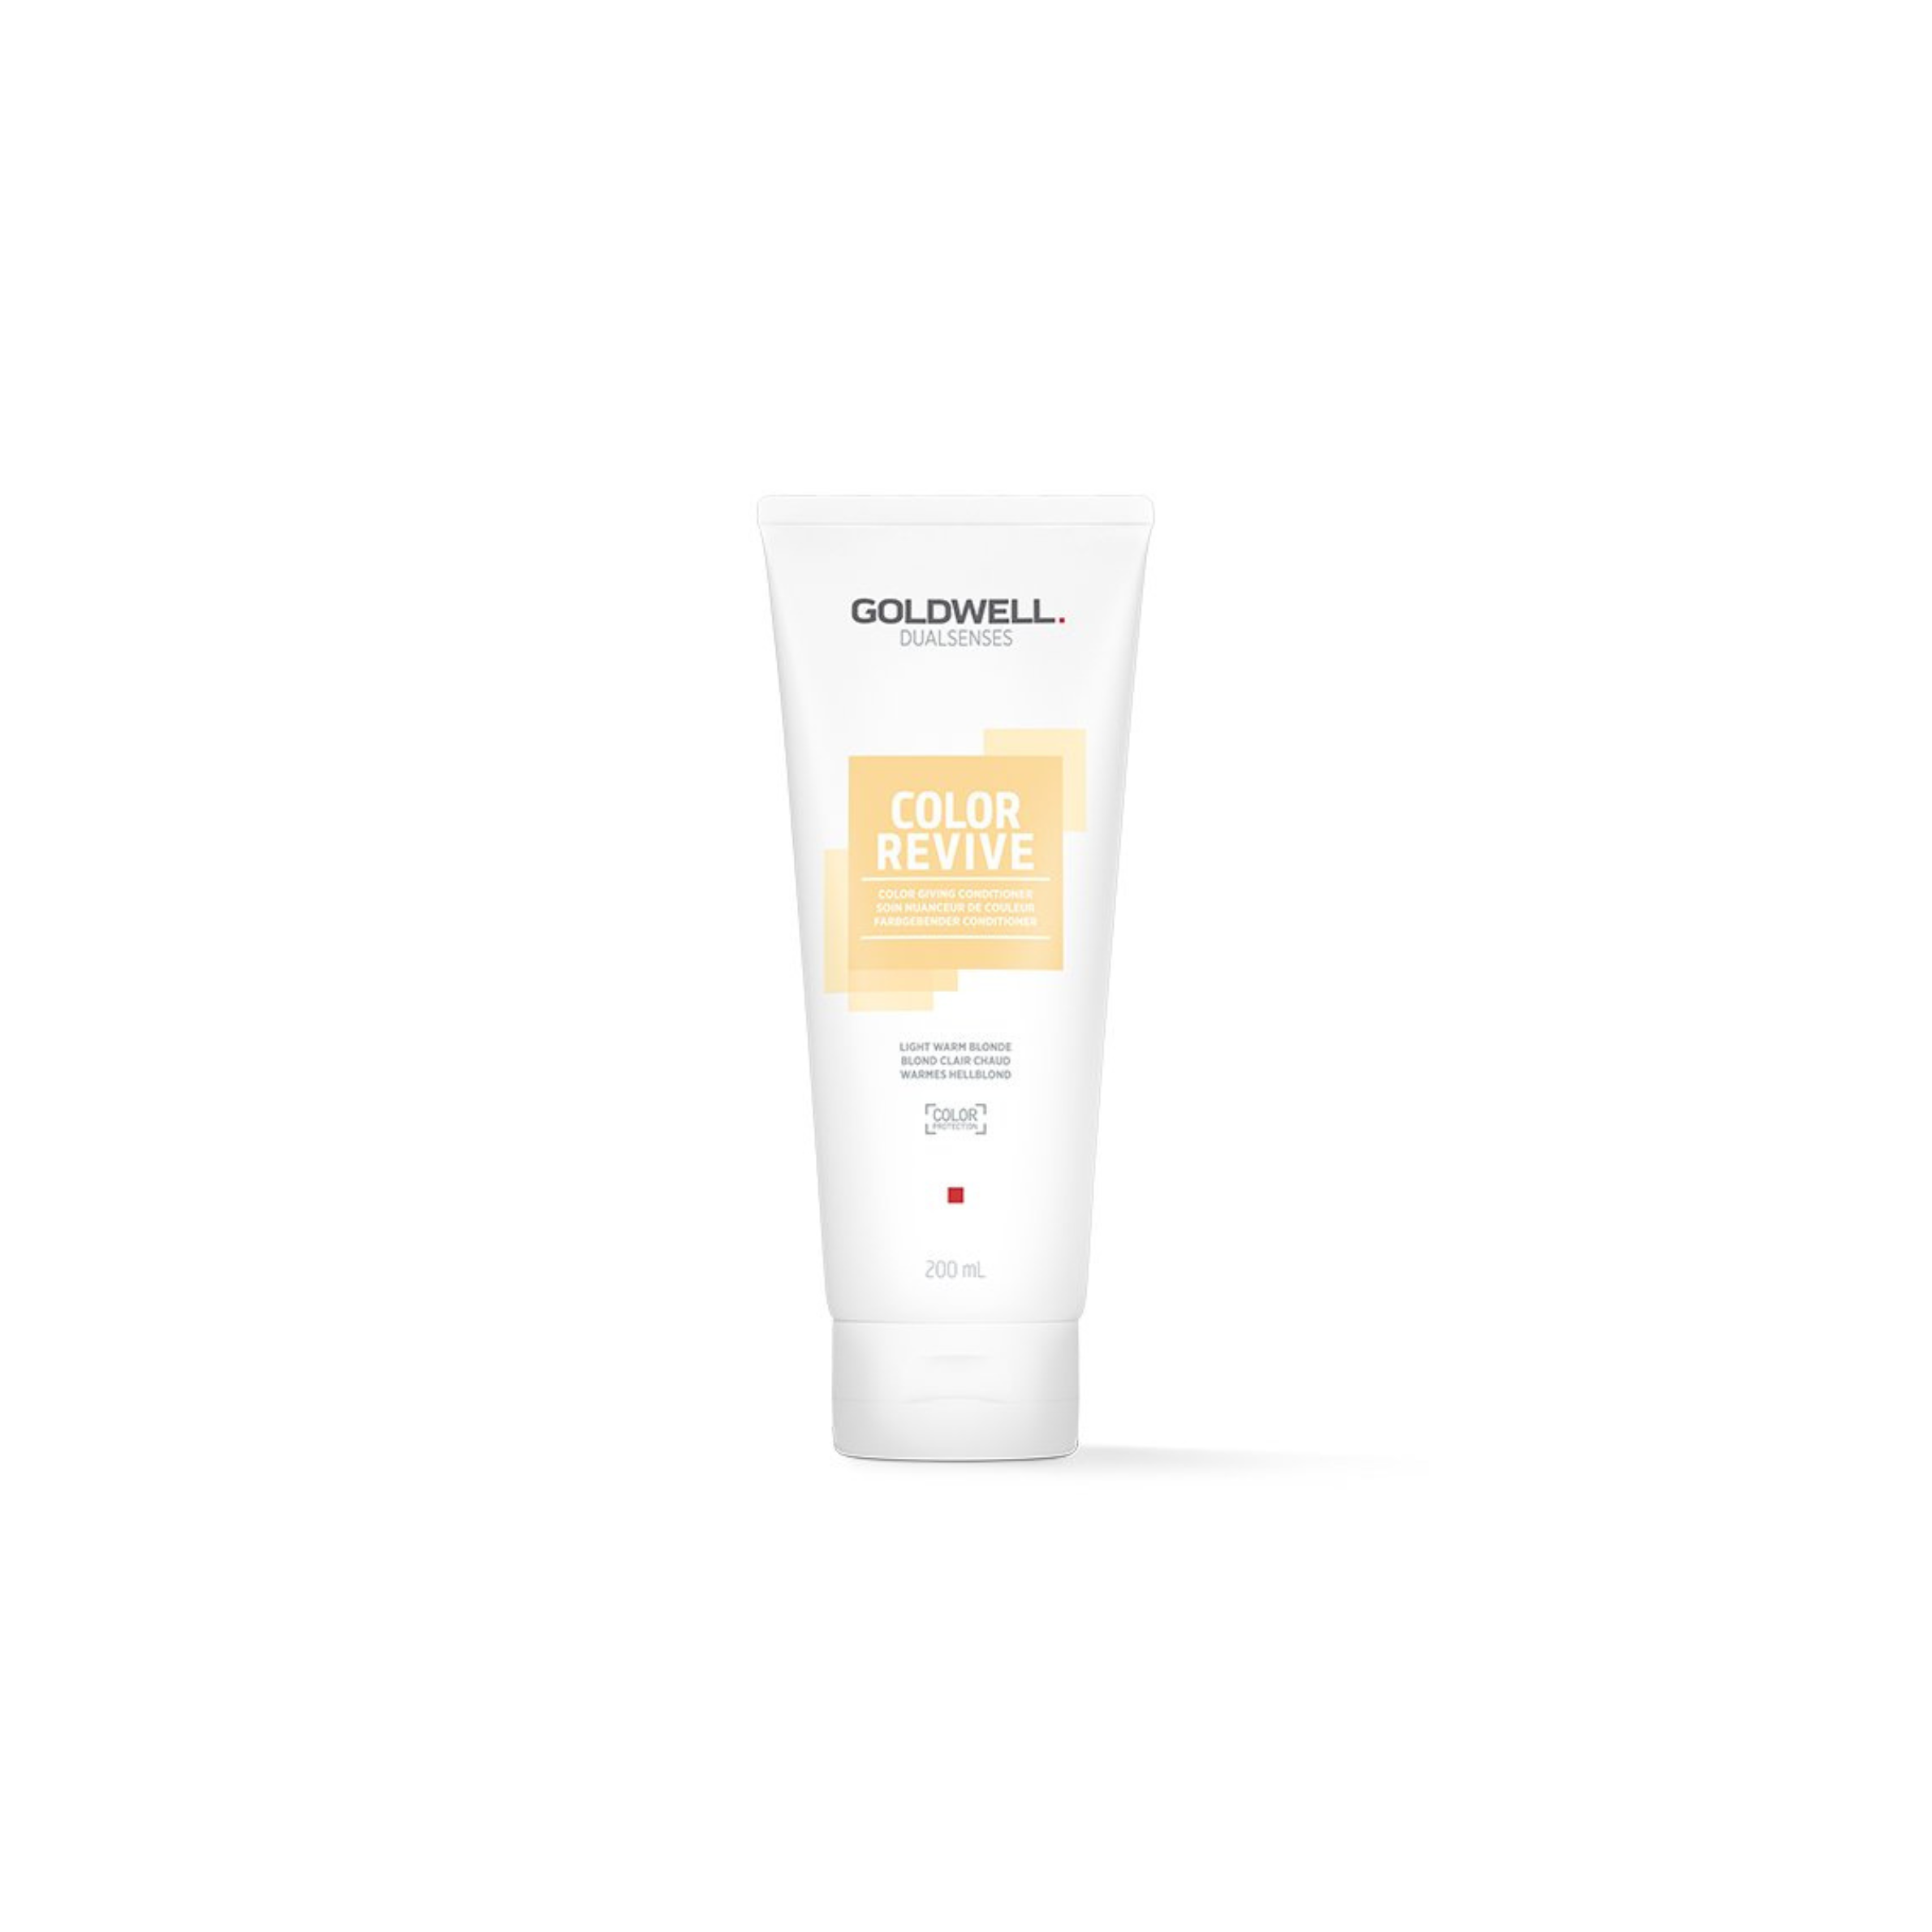 Goldwell Color Revive Color Giving Conditioner - Light Warm Blonde